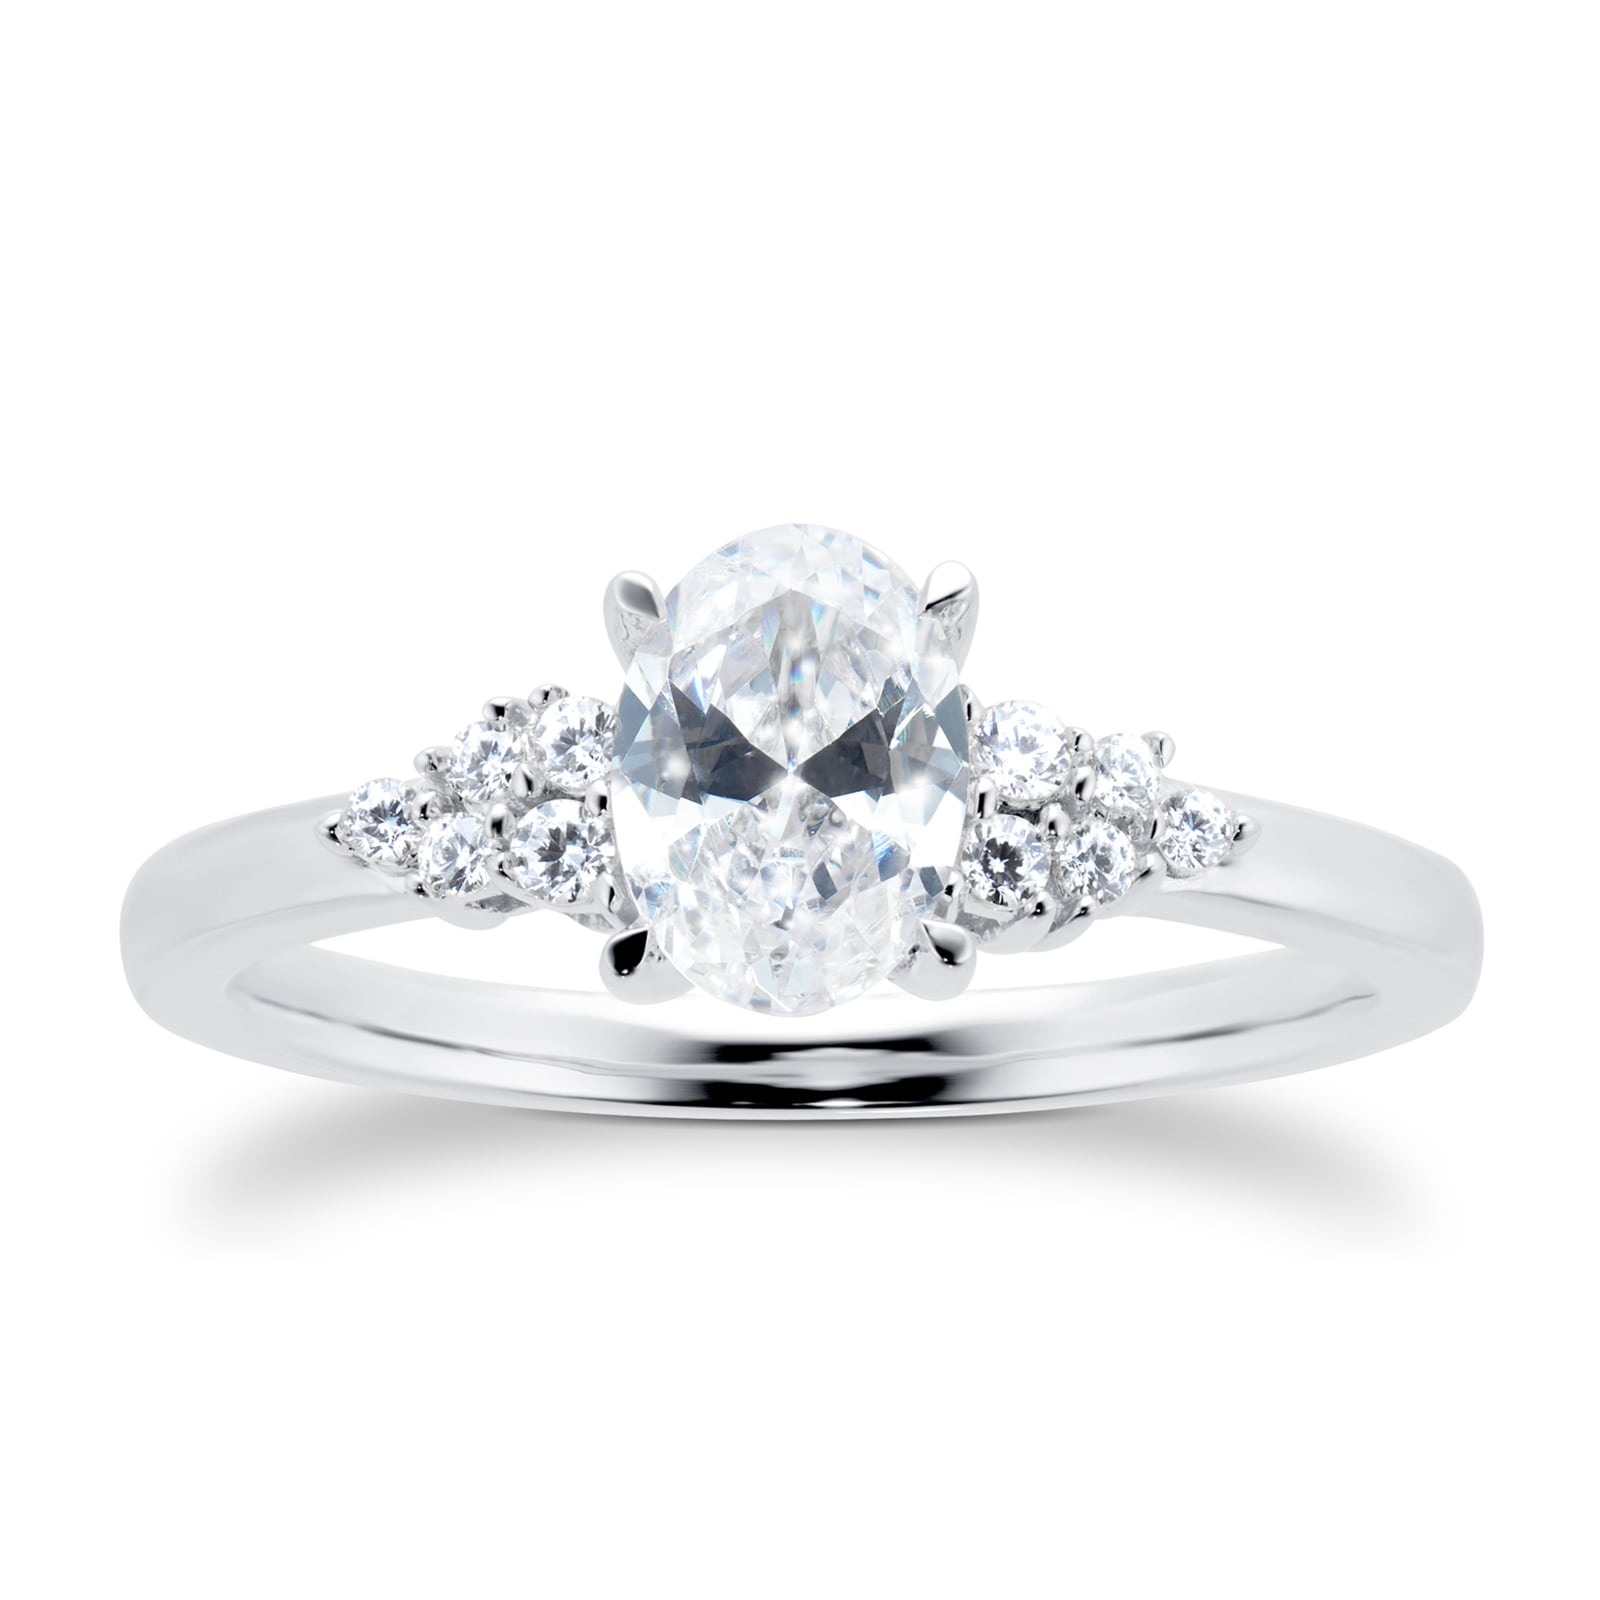 Platinum 0.70cttw Diamond Oval Cut Scatter Ring - Ring Size Q